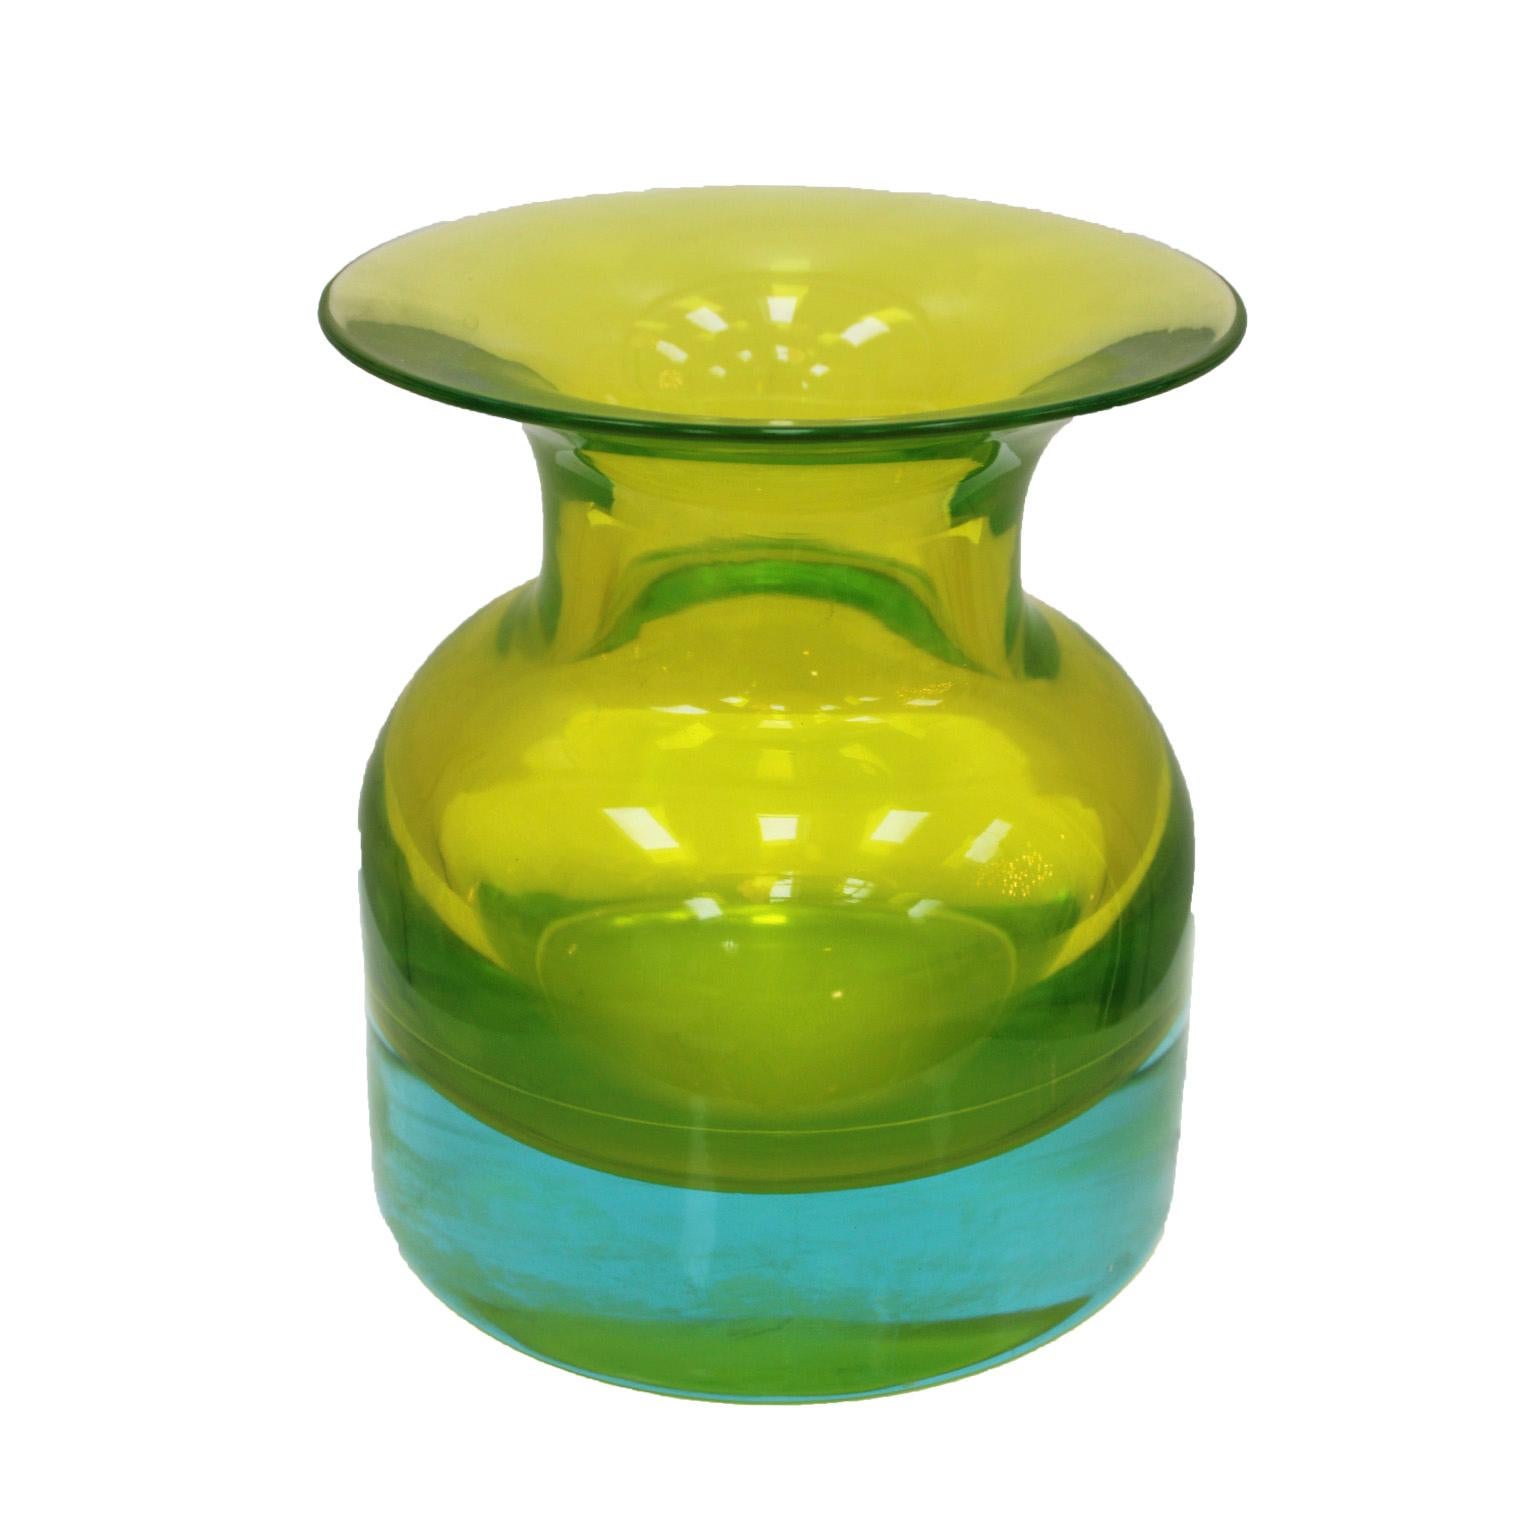 Mid-century Modern Glass vase. Attributed to Flavio Poli for Seguso. Italy, 50s.
In sommerso glass, the yellow body is submerged in a very slightly turquoise mass. (Color variant Giallo – Turchese)

Every item LA Studio offers is checked by our team